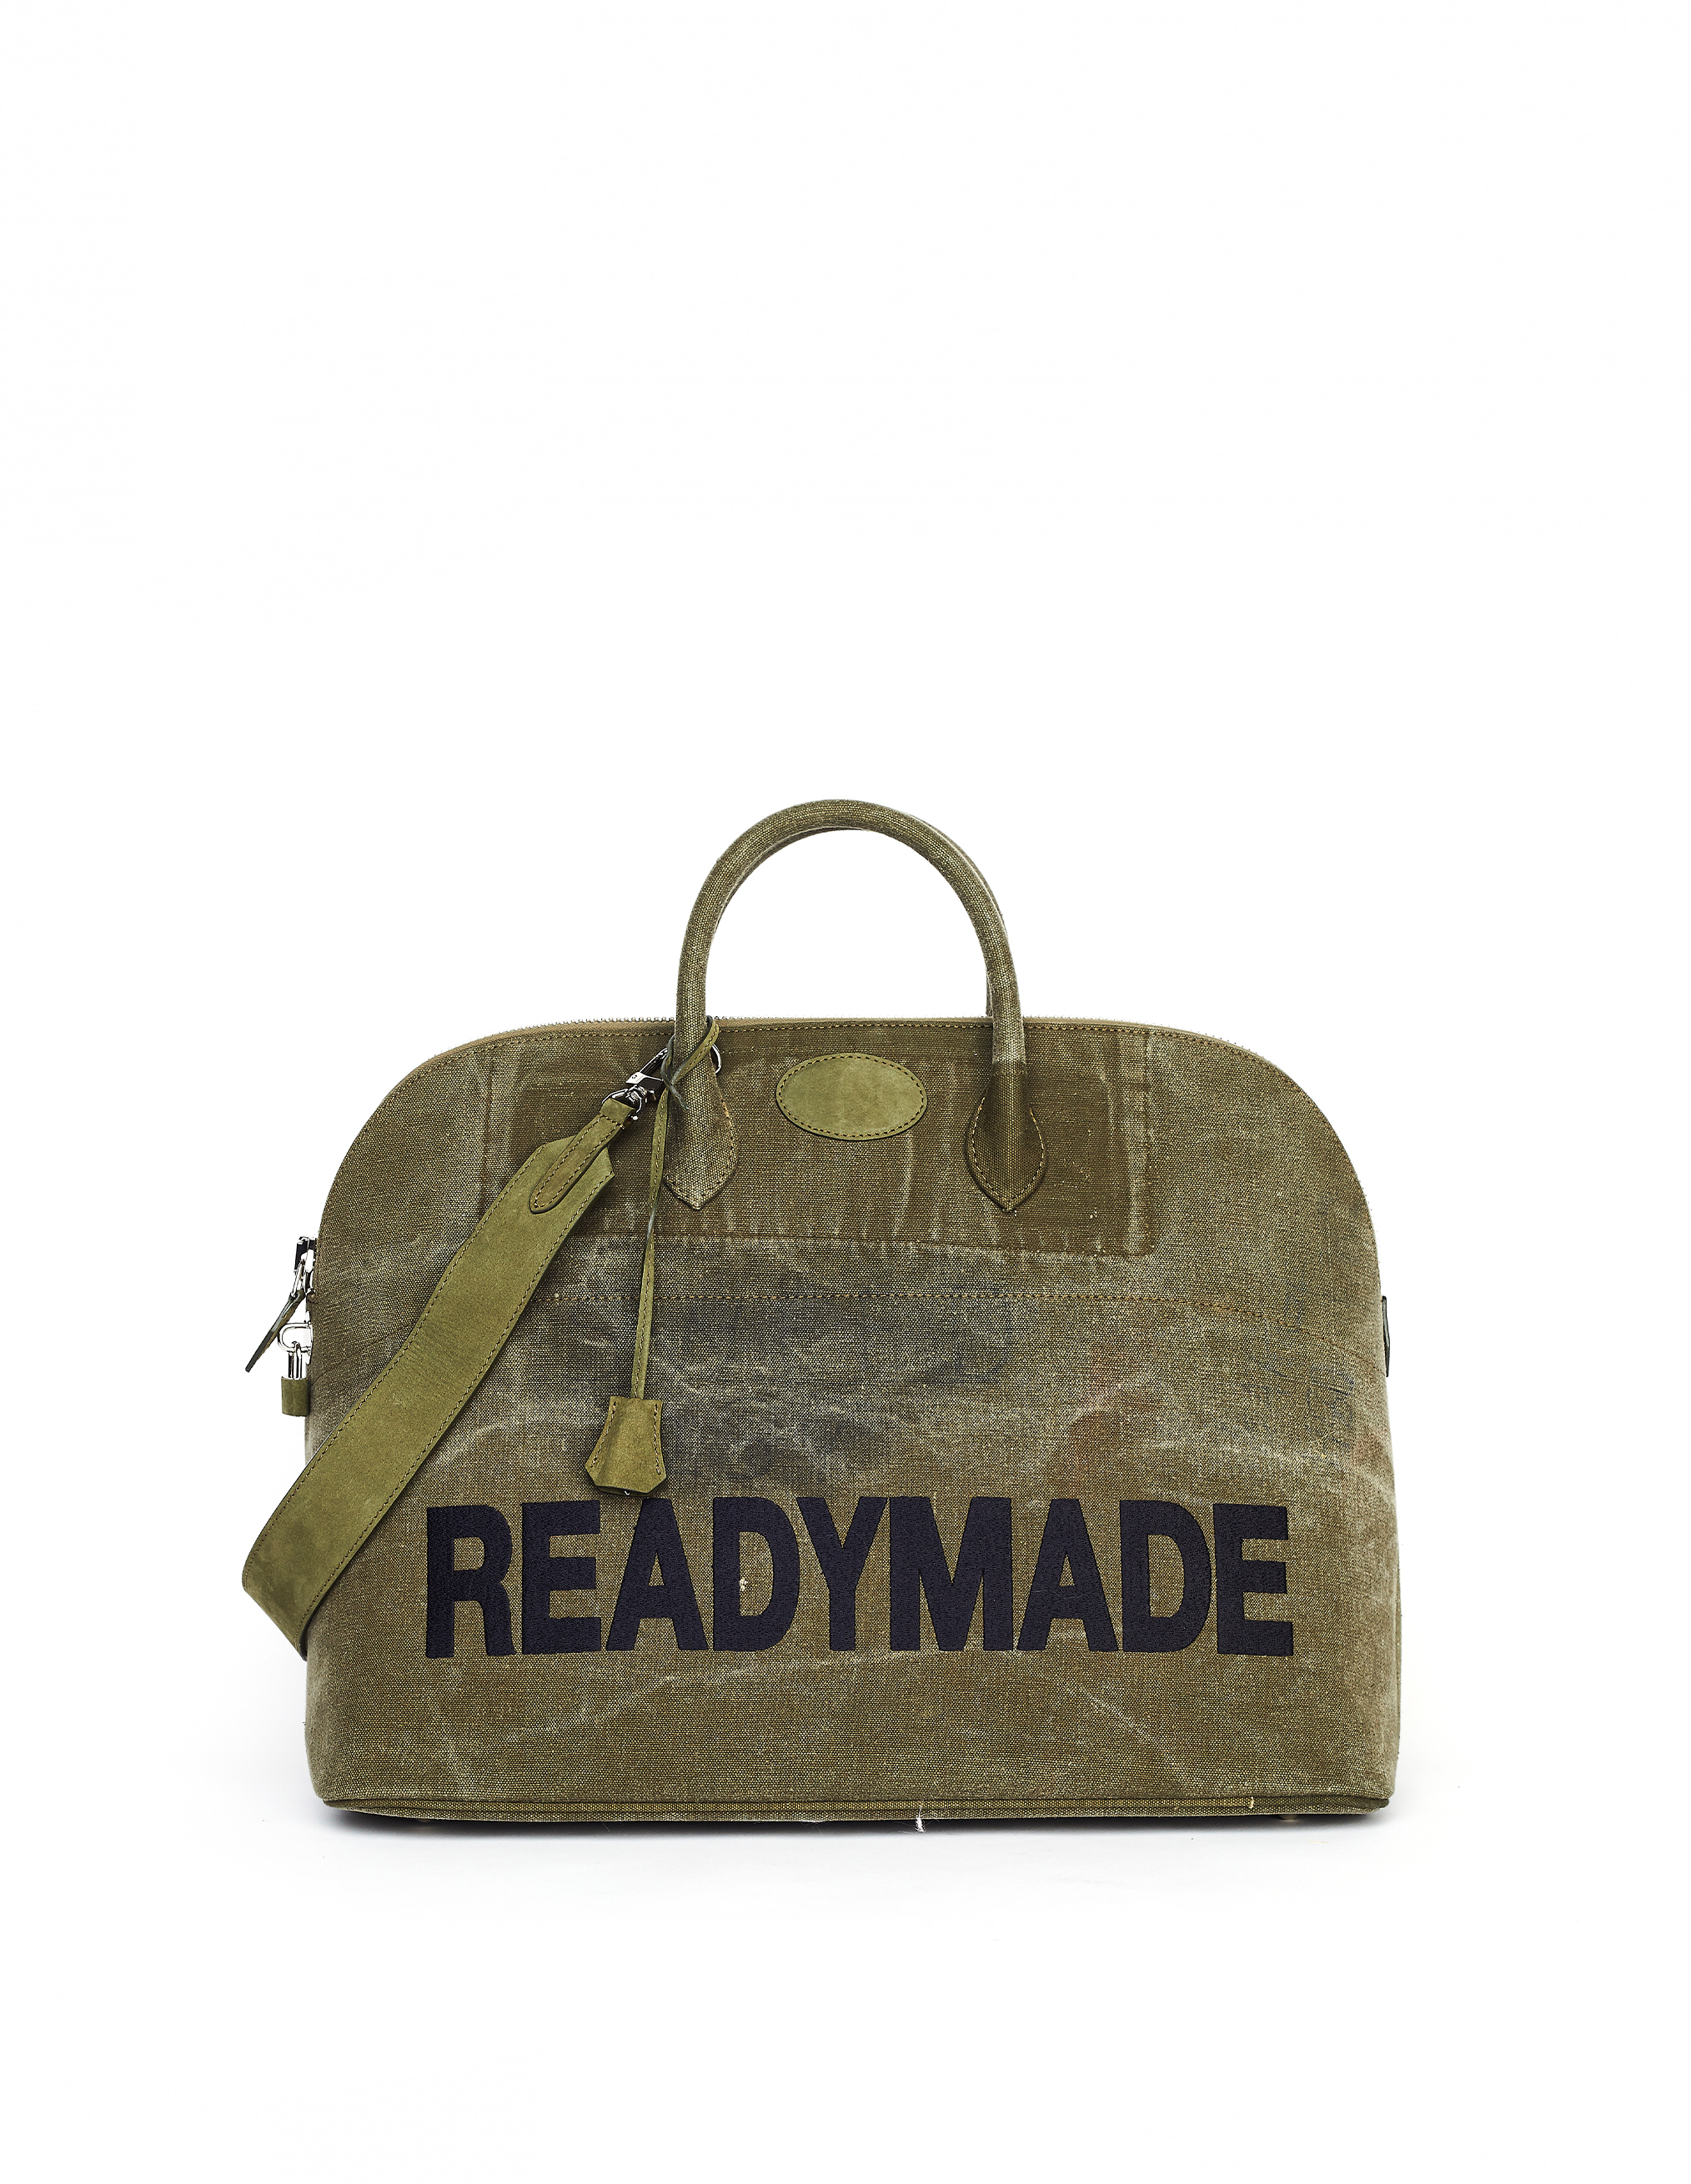 READYMADE READYMADE KHAKI EMBROIDERED TRAVEL BAG,RE-CO-KH-00-00-66/GRN